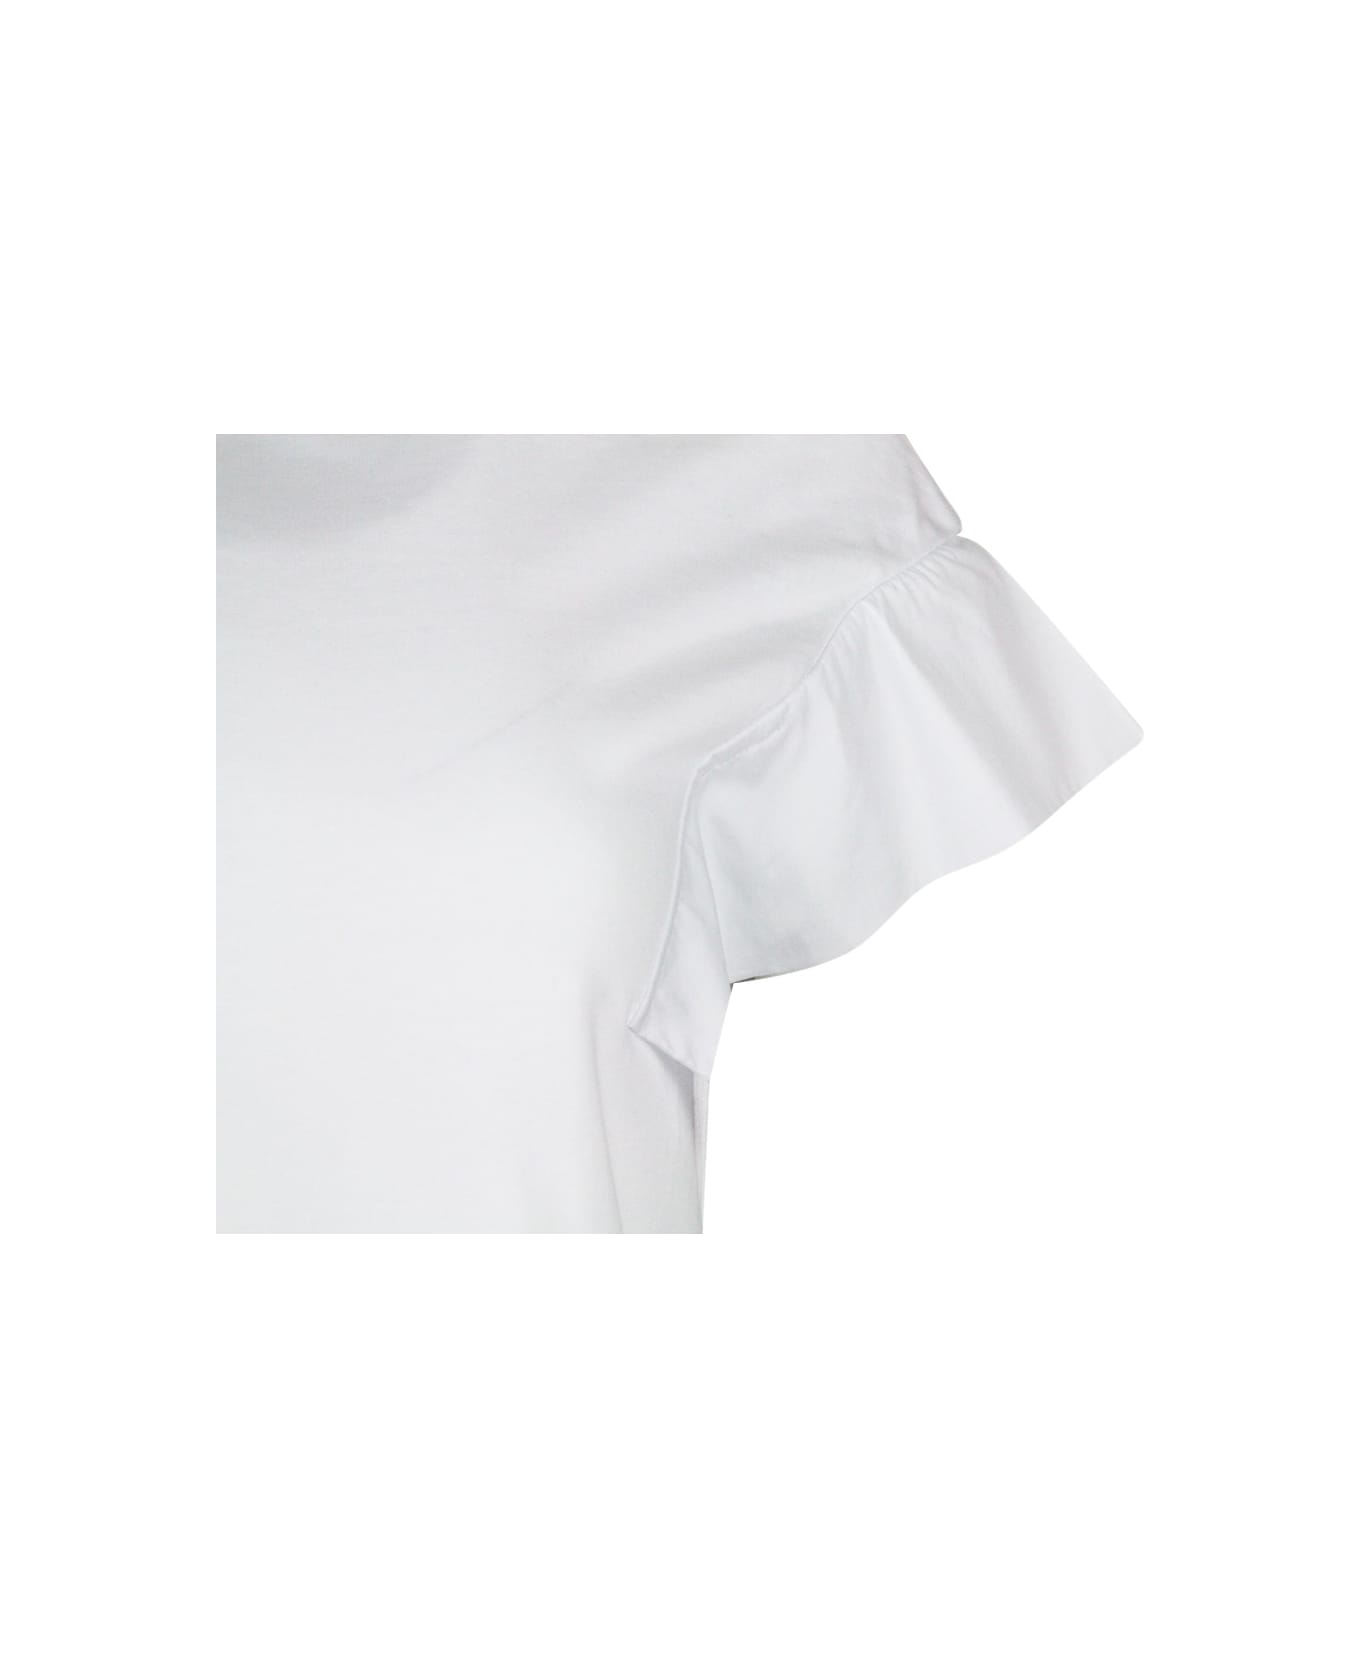 Lorena Antoniazzi Round Neck T-shirt In Cotton Jersey With Flared Cap Sleeves - White Tシャツ